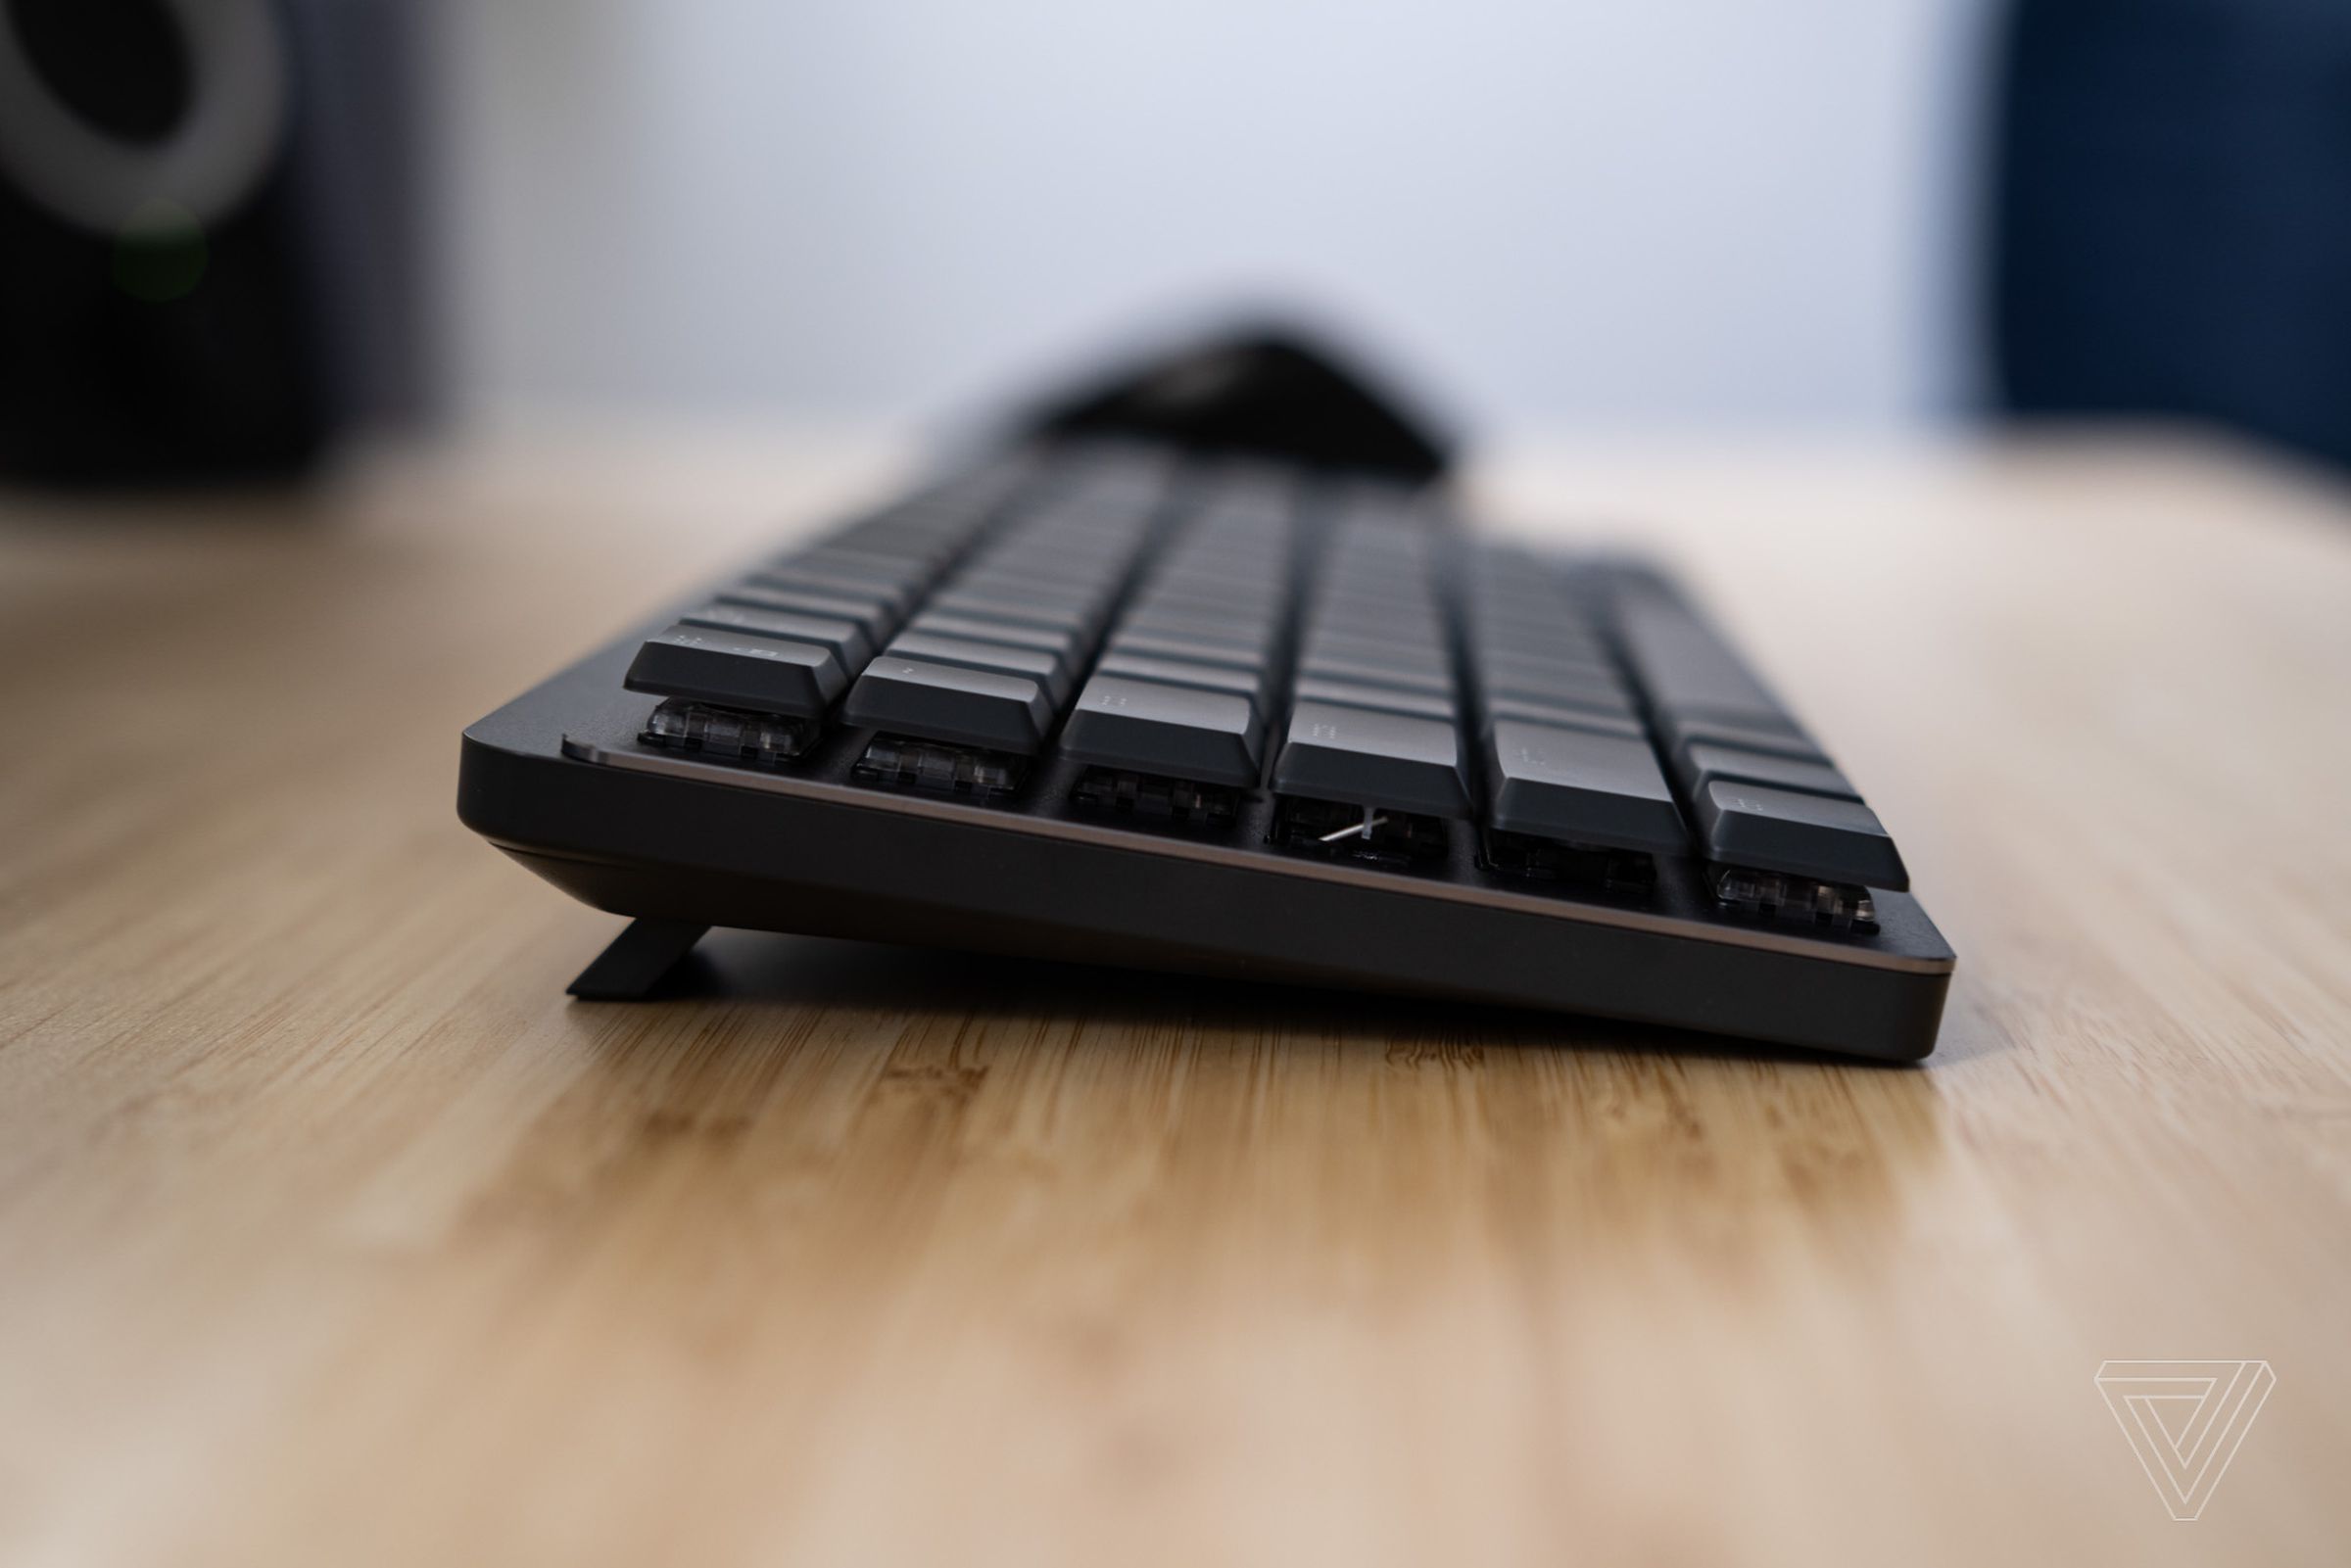 Its low-profile design will be familiar to anyone who’s used to laptop keyboards.